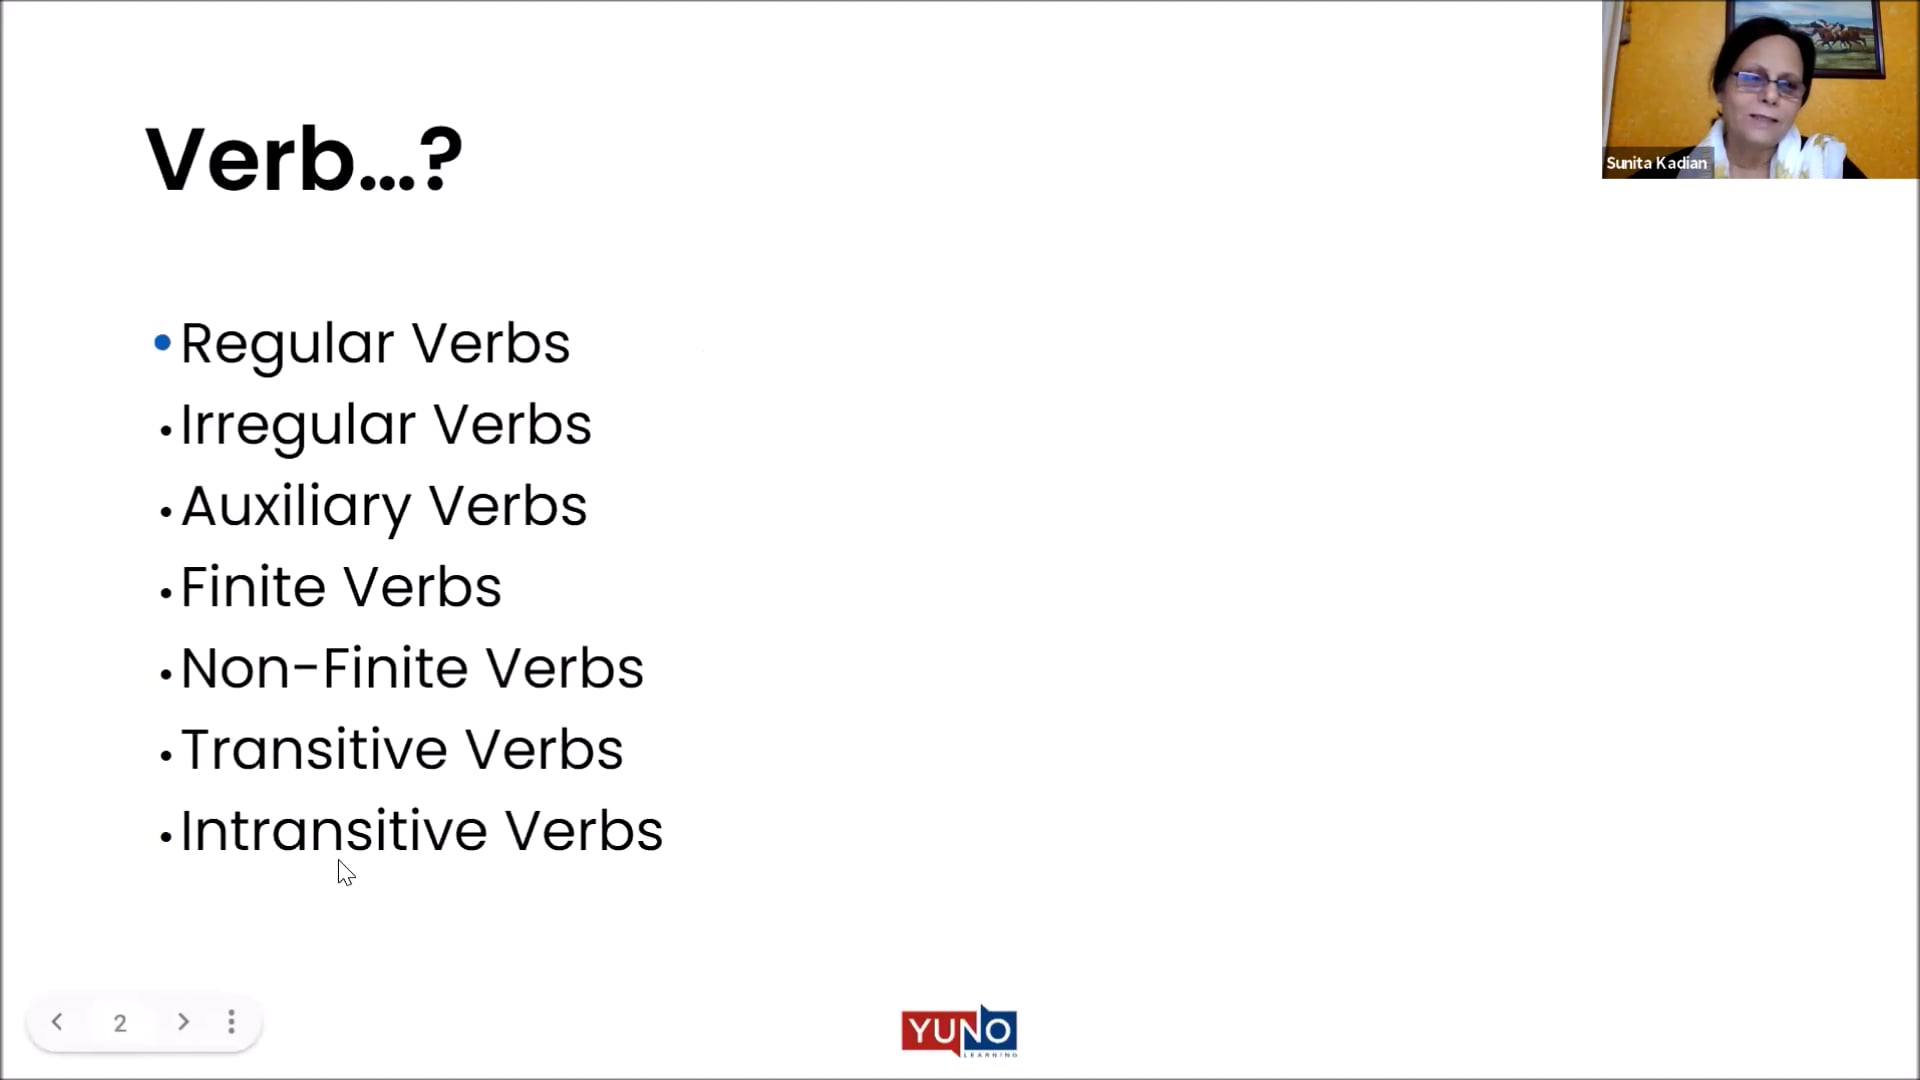 Finite Verbs: Explanation and Examples